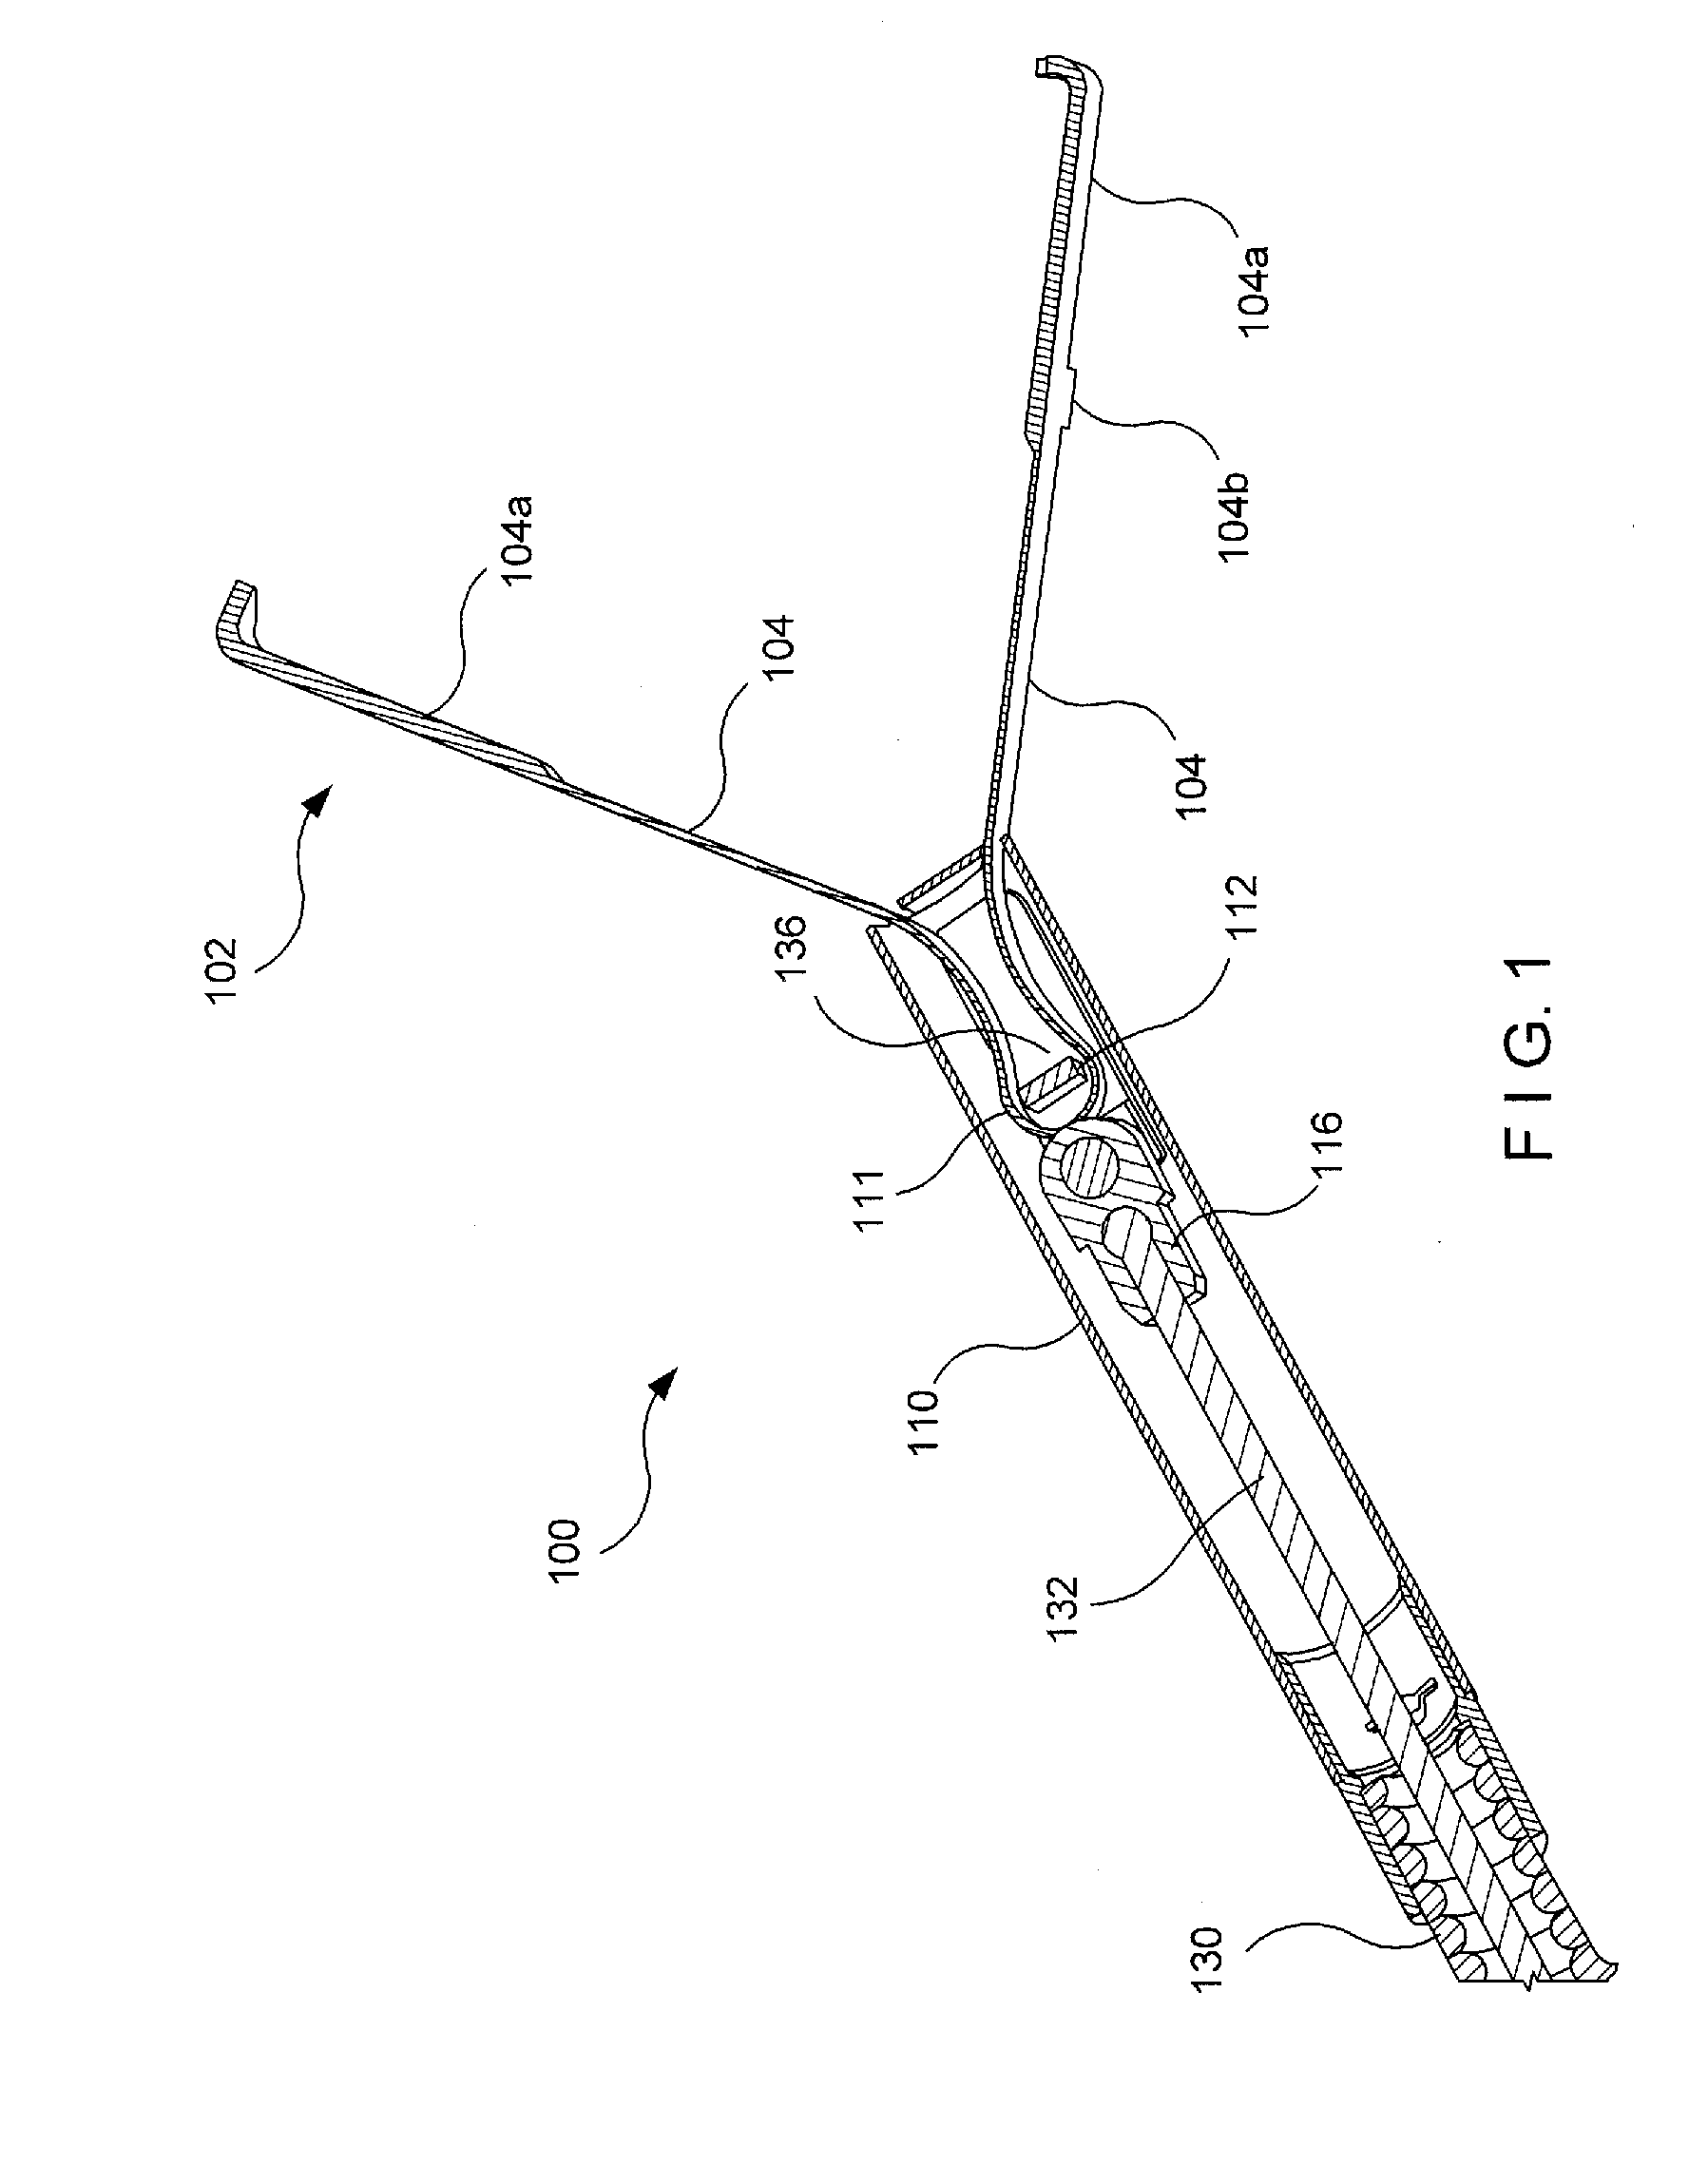 Hemostatic Clipping Devices and Methods